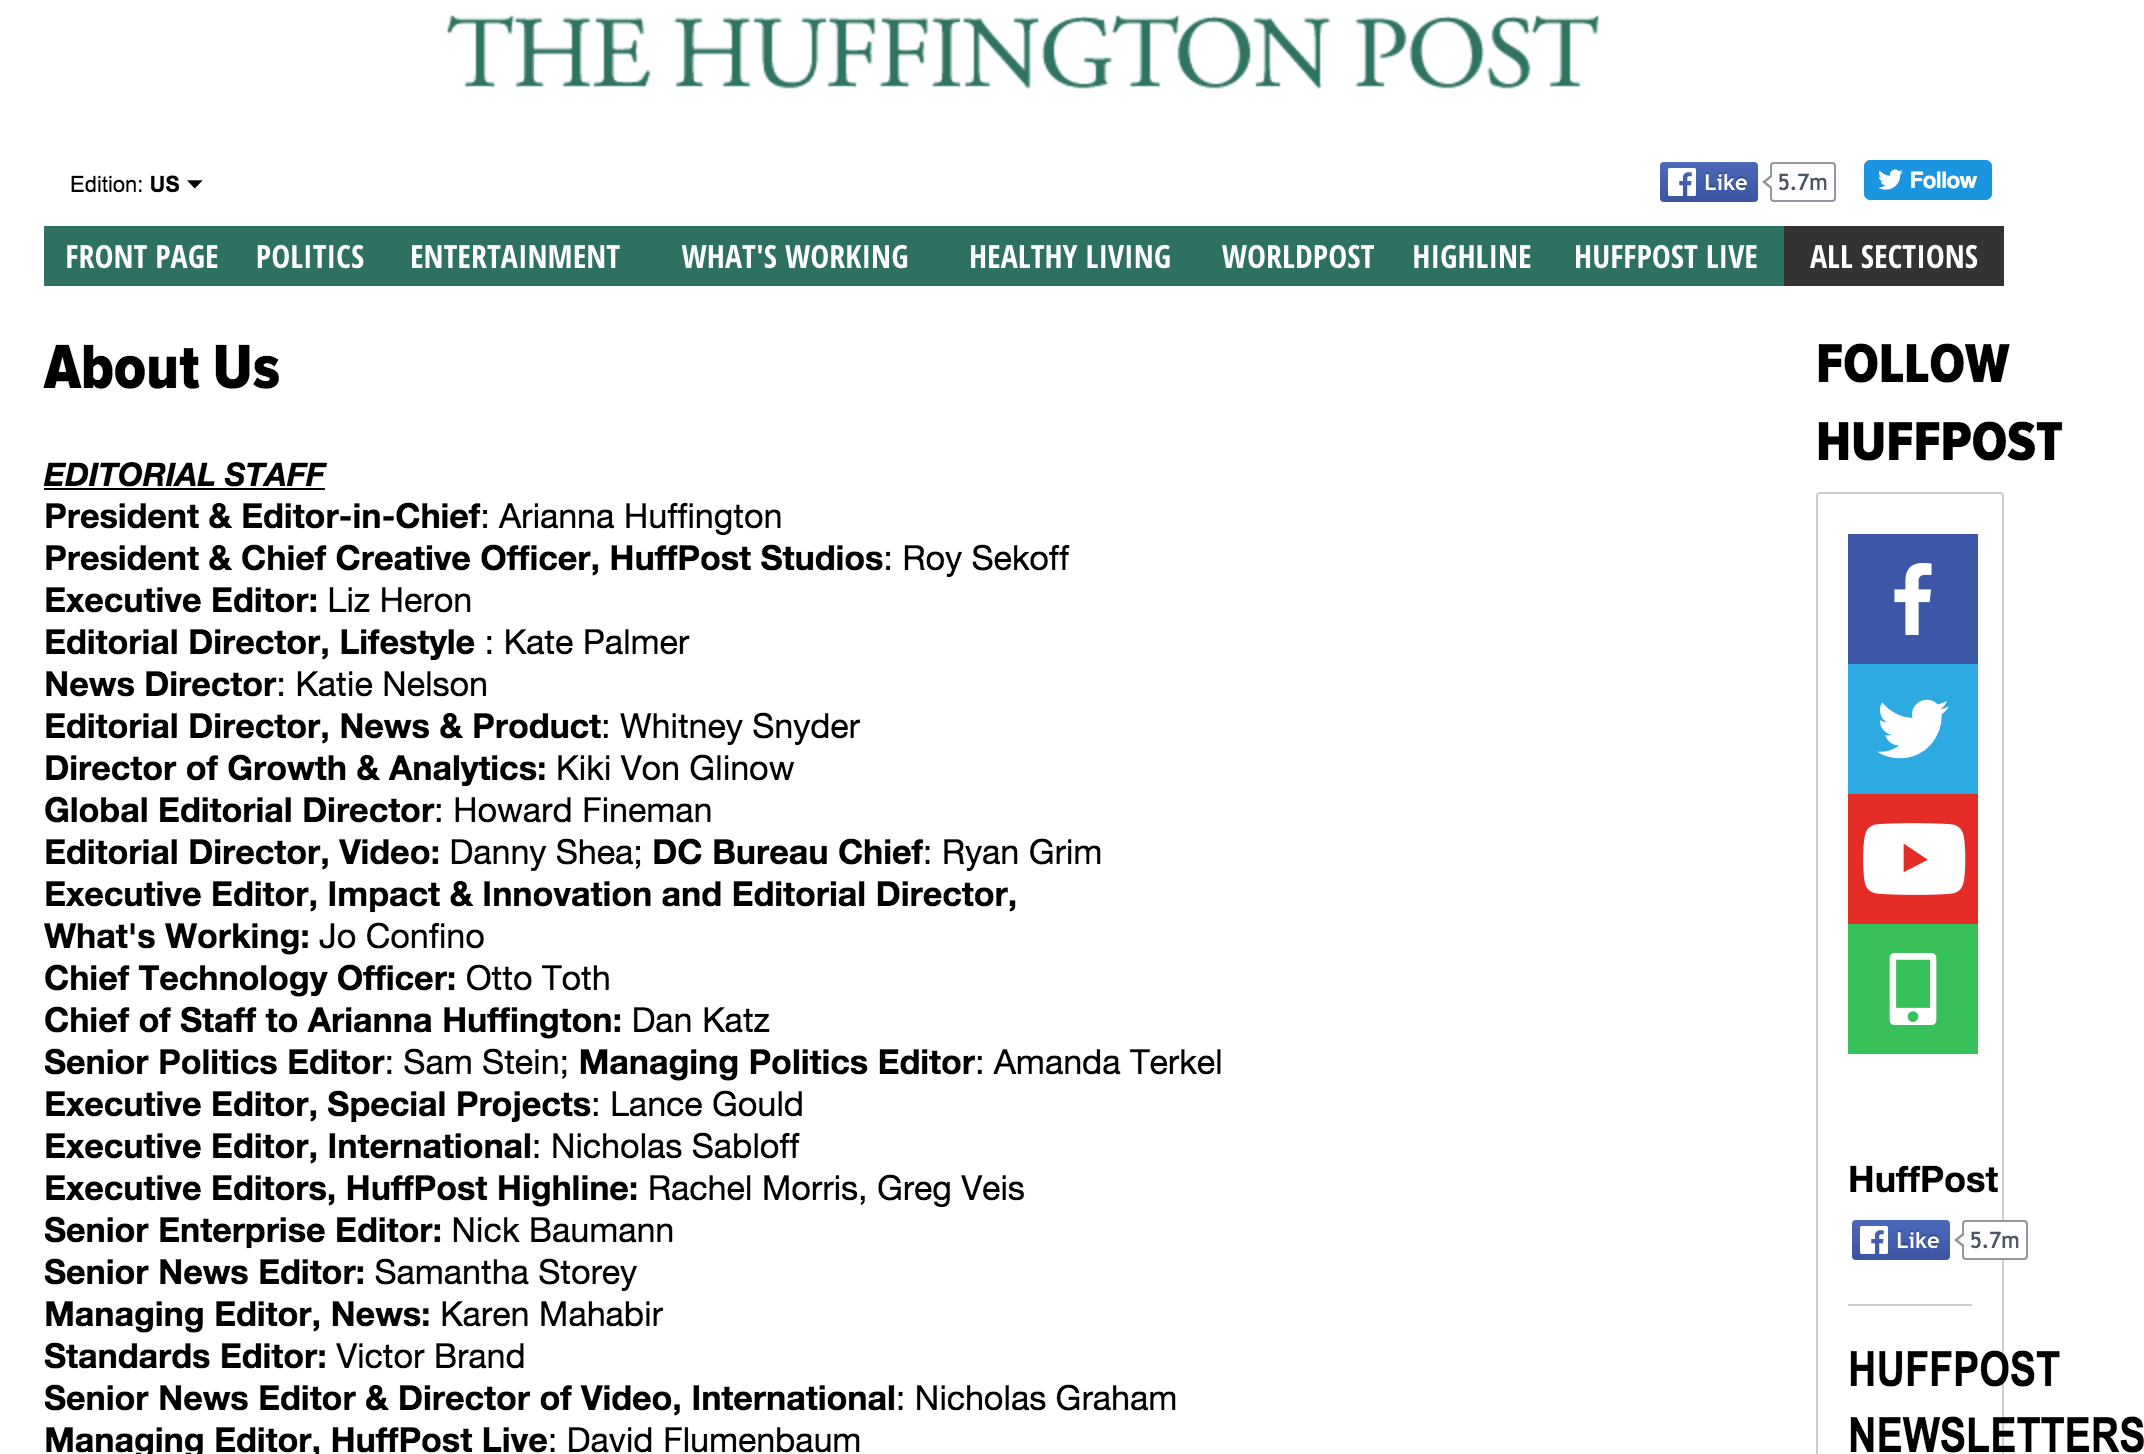 Screenshot showing the editorial stuff of the Huffington Post